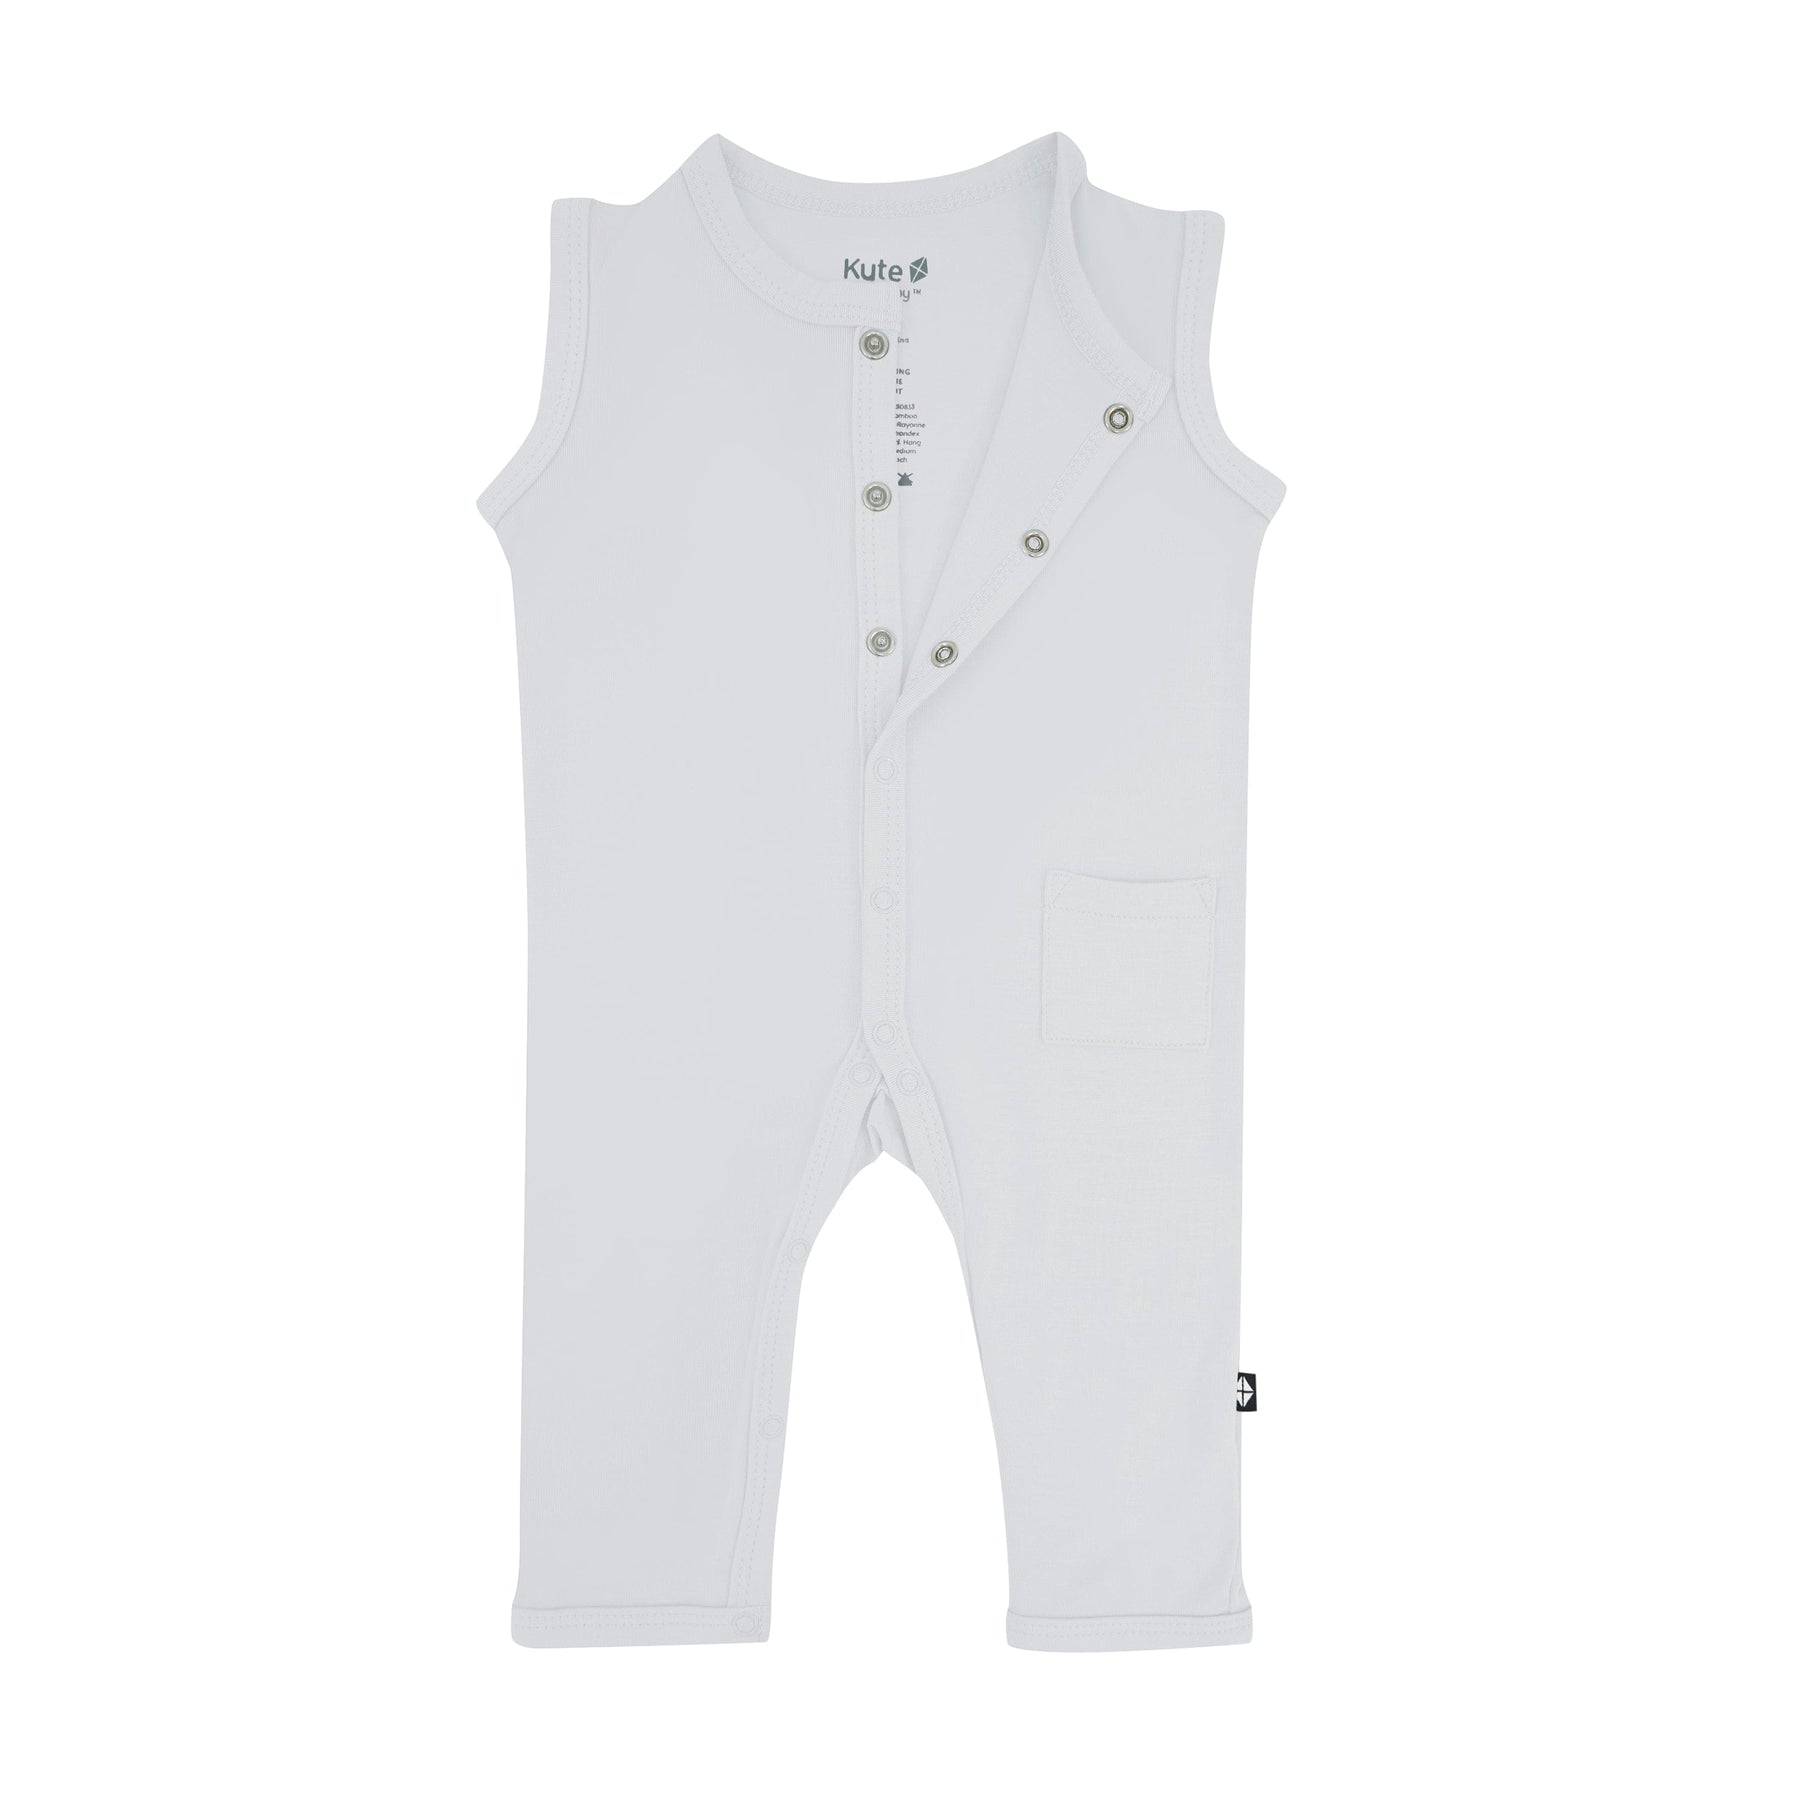 Kyte Baby Sleeveless Romper in Storm with snap closure